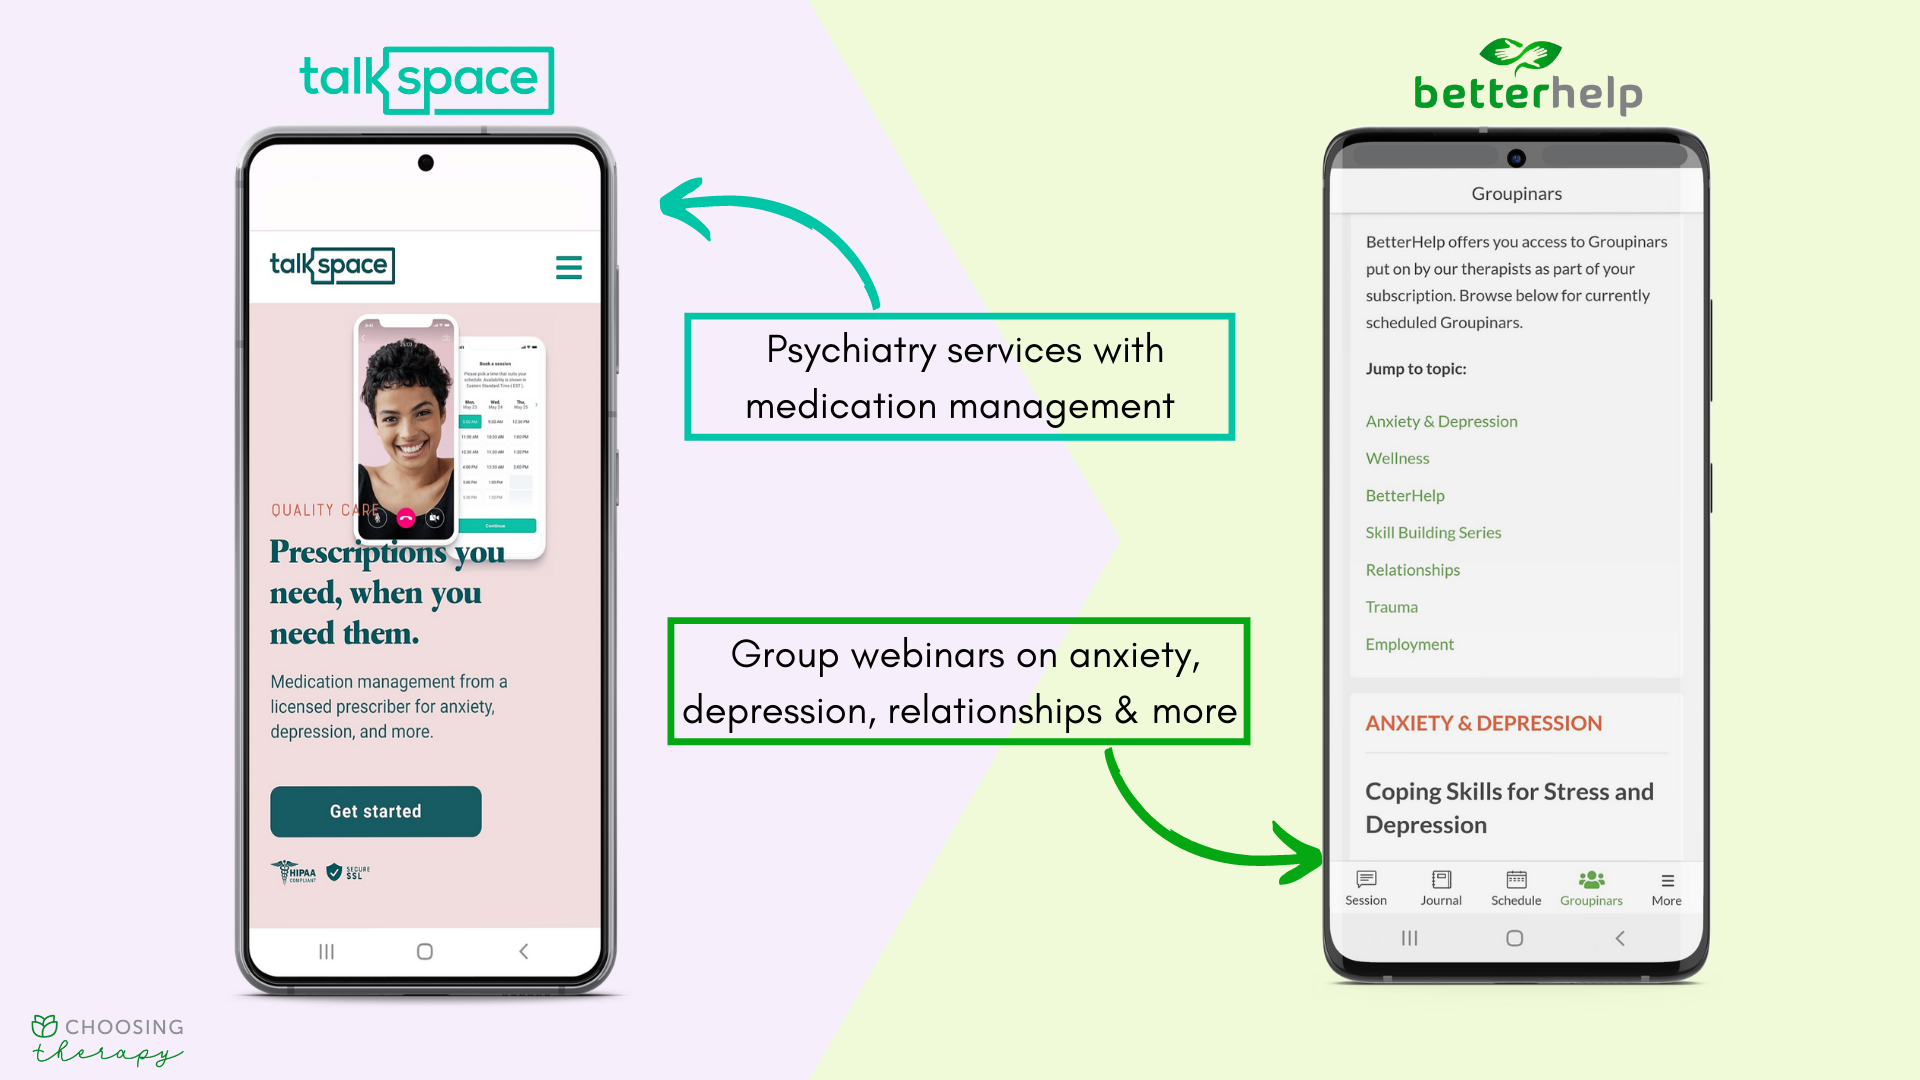 Talkspace vs BetterHelp Review 2022 - Image of unique offerings for both, Psychiatry for Talkspace and Groupinars for BetterHelp